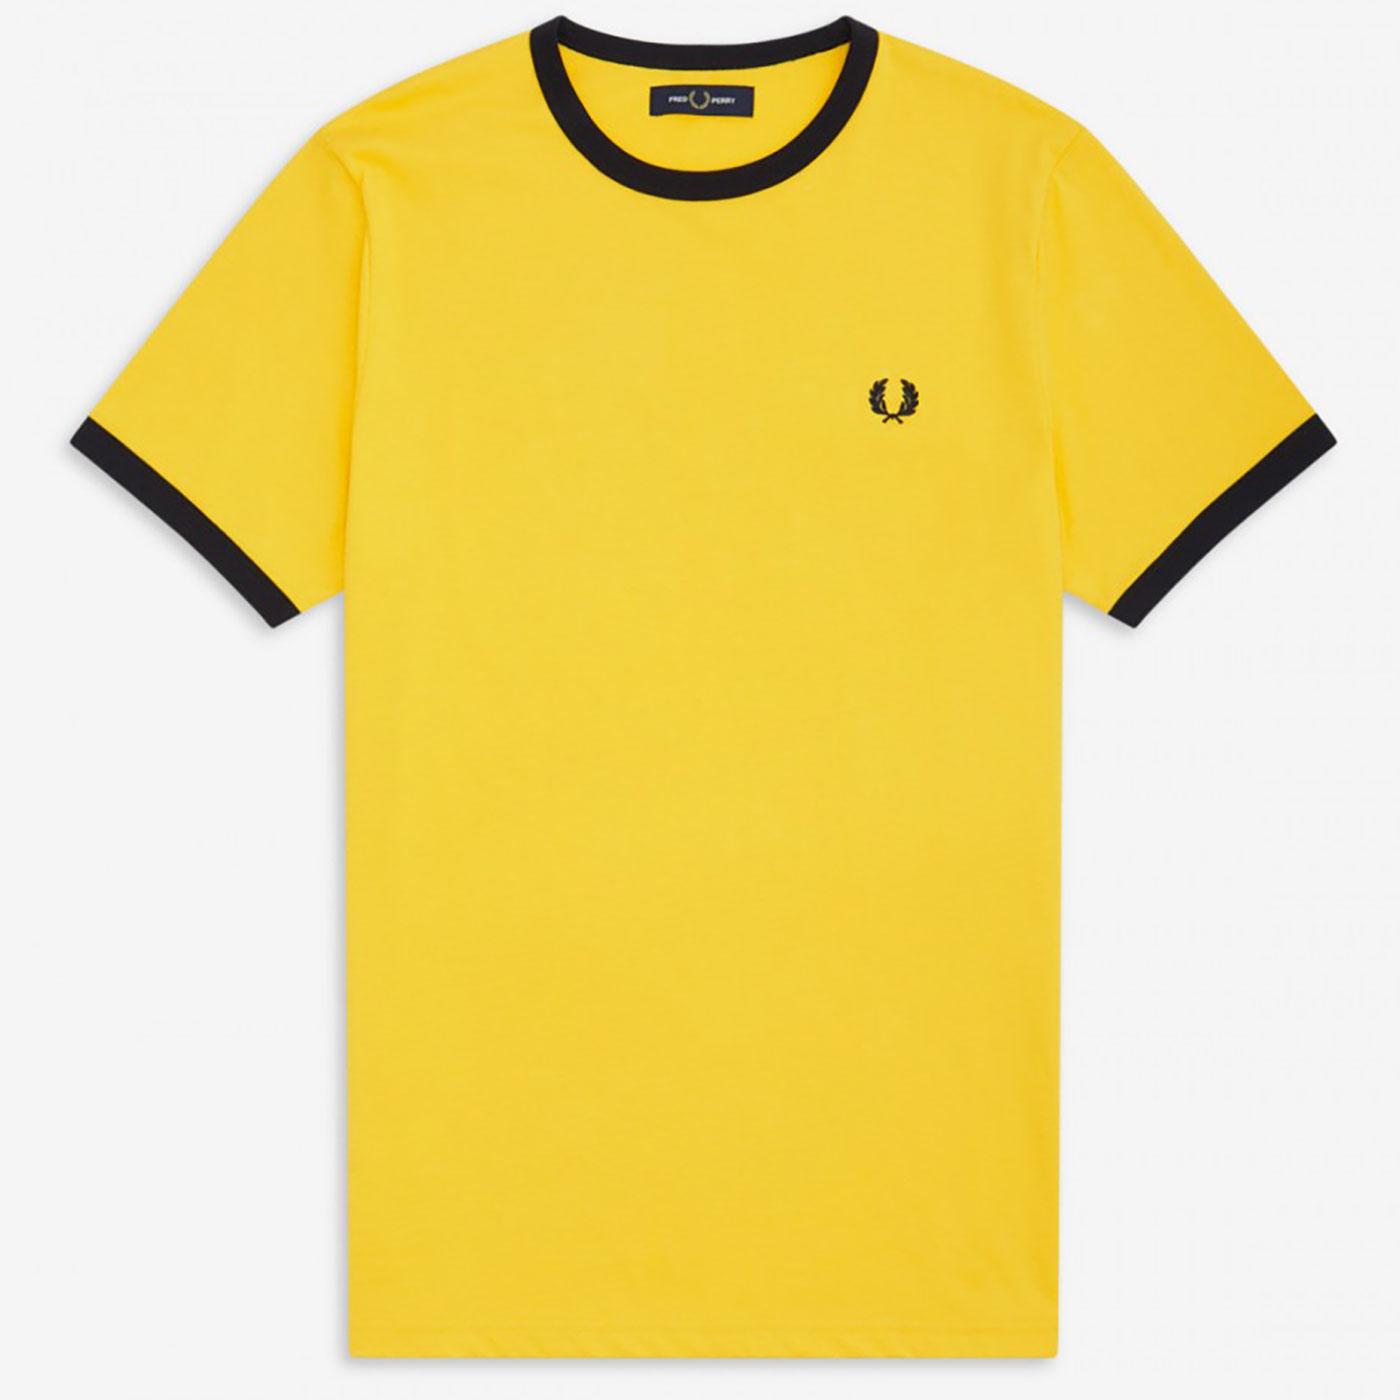 FRED PERRY Mens Retro Mod Ringer T-Shirt in Sunglow